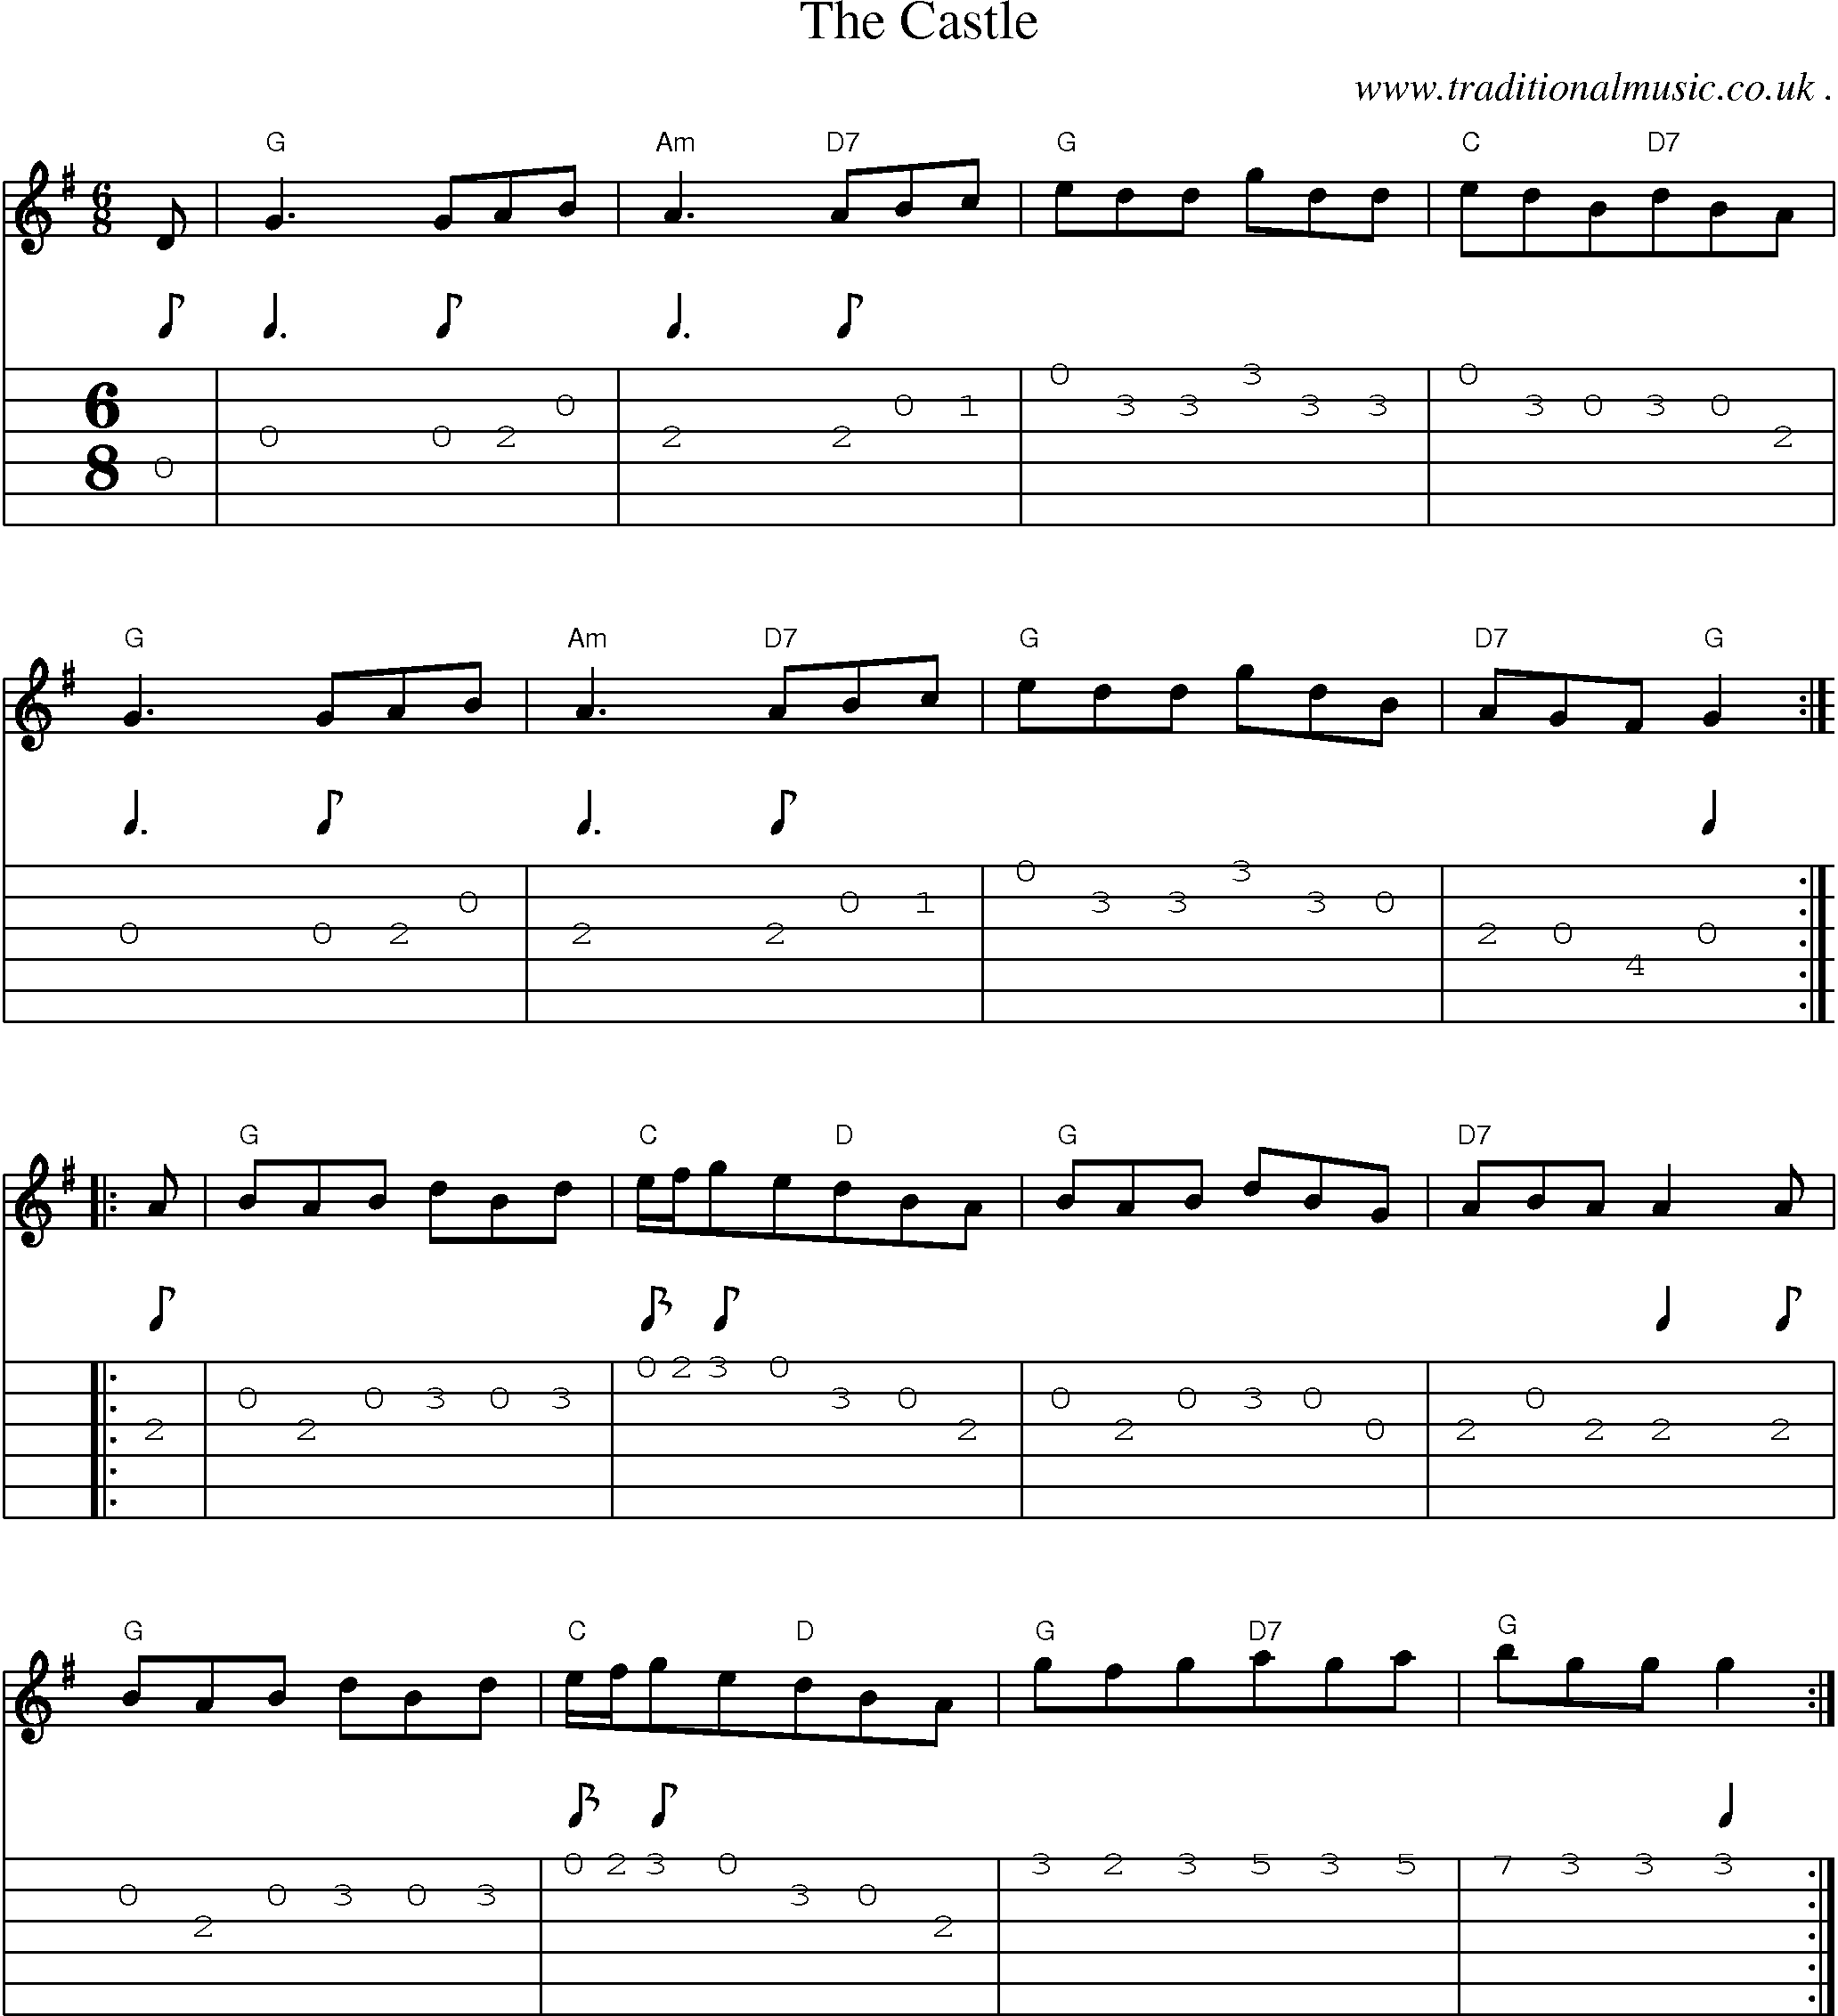 Sheet-Music and Guitar Tabs for The Castle